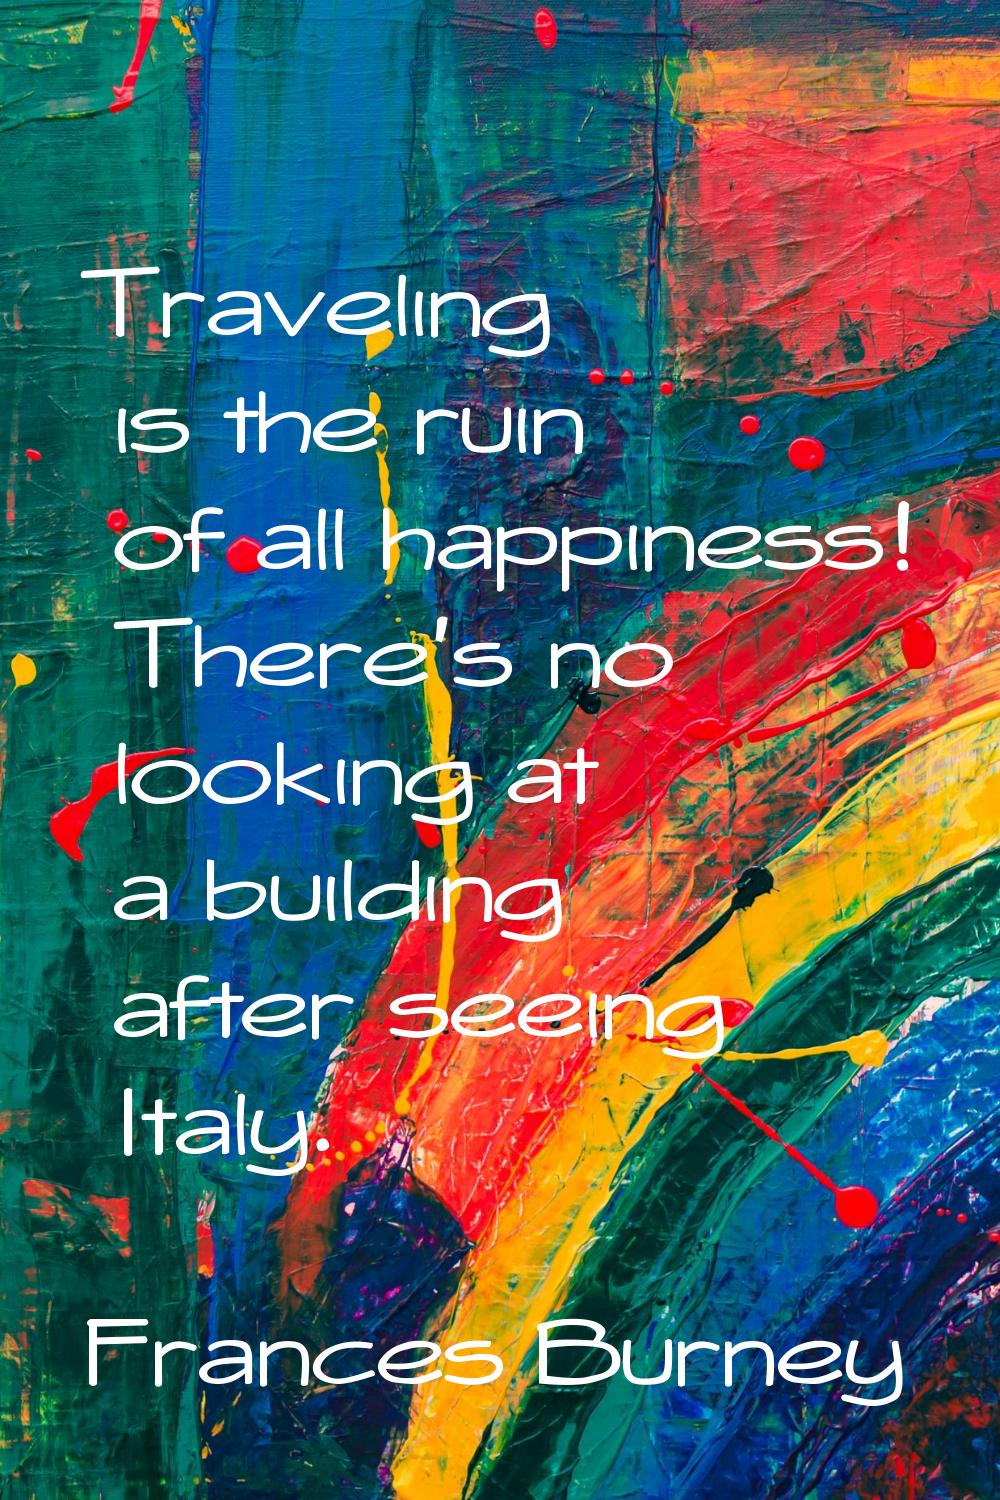 Traveling is the ruin of all happiness! There's no looking at a building after seeing Italy.